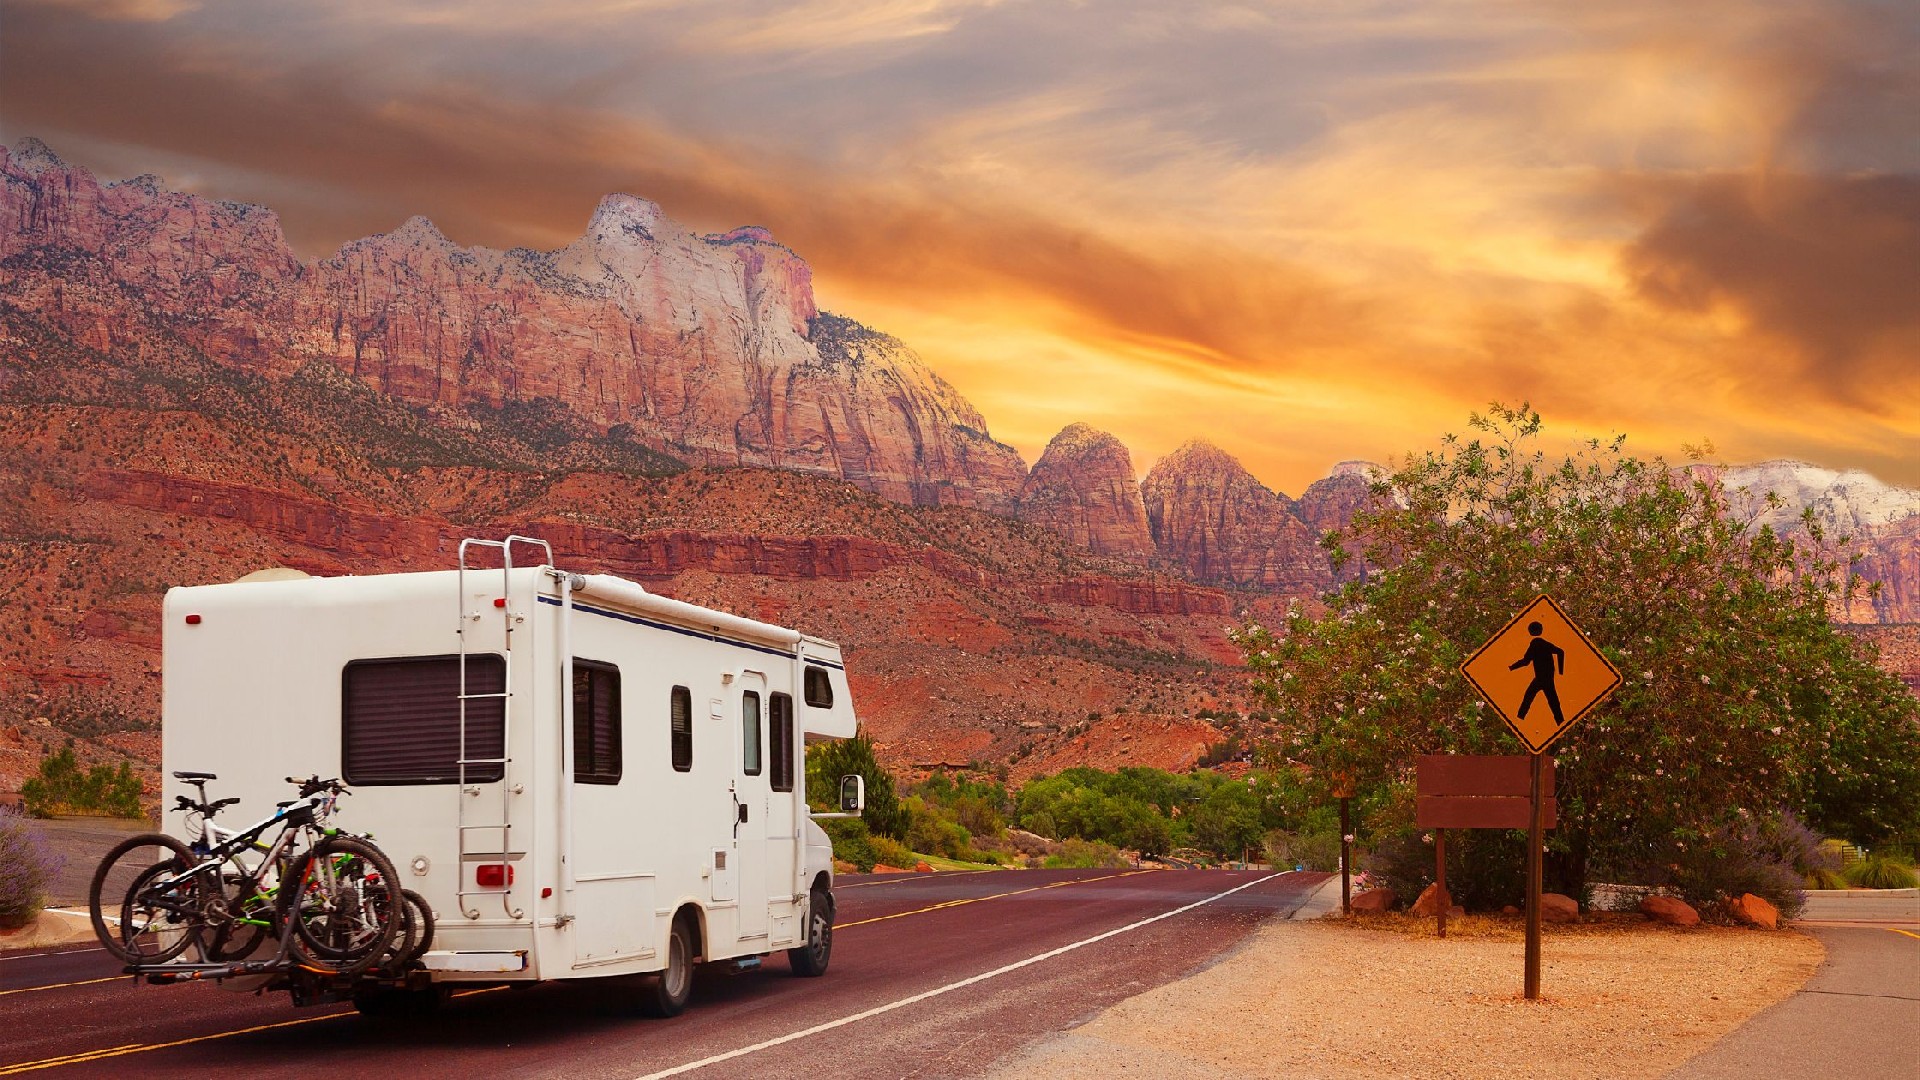 How to Choose an RV: All Factors to Consider